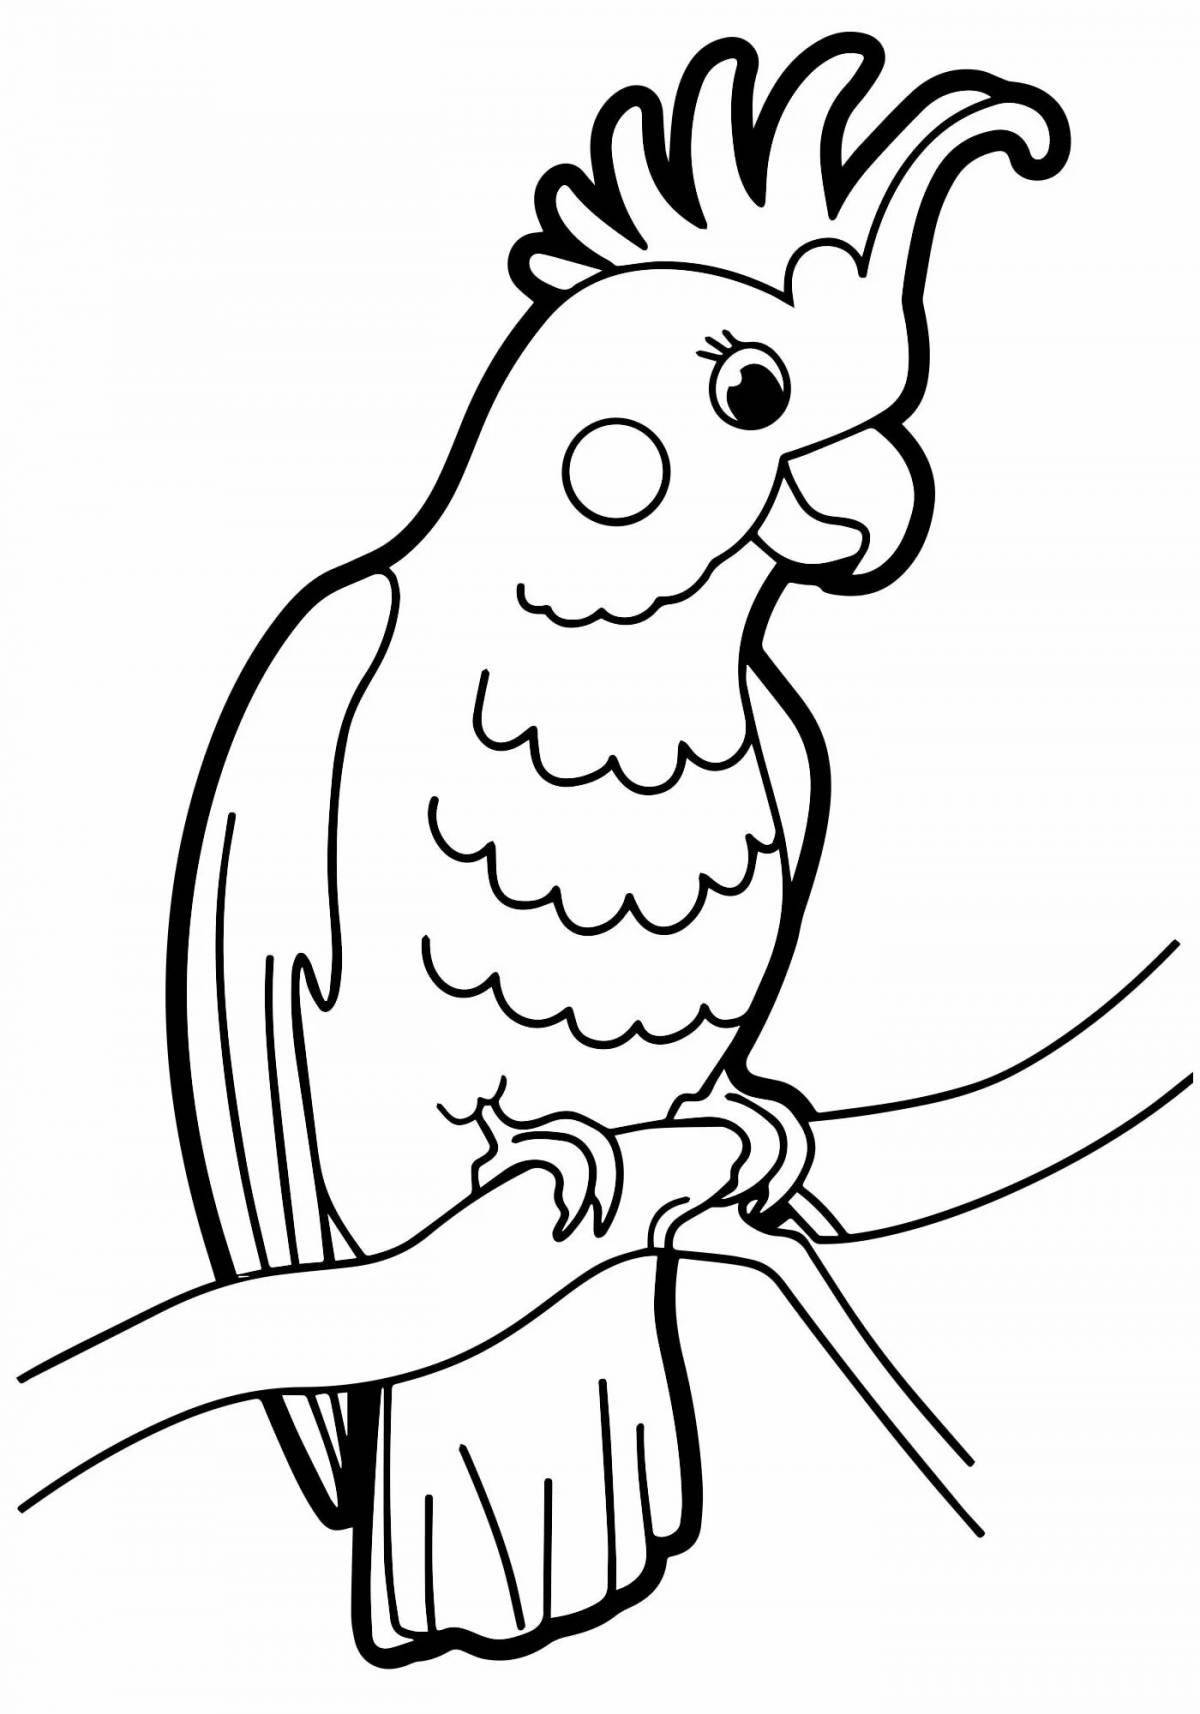 Colorful cockatoo coloring page